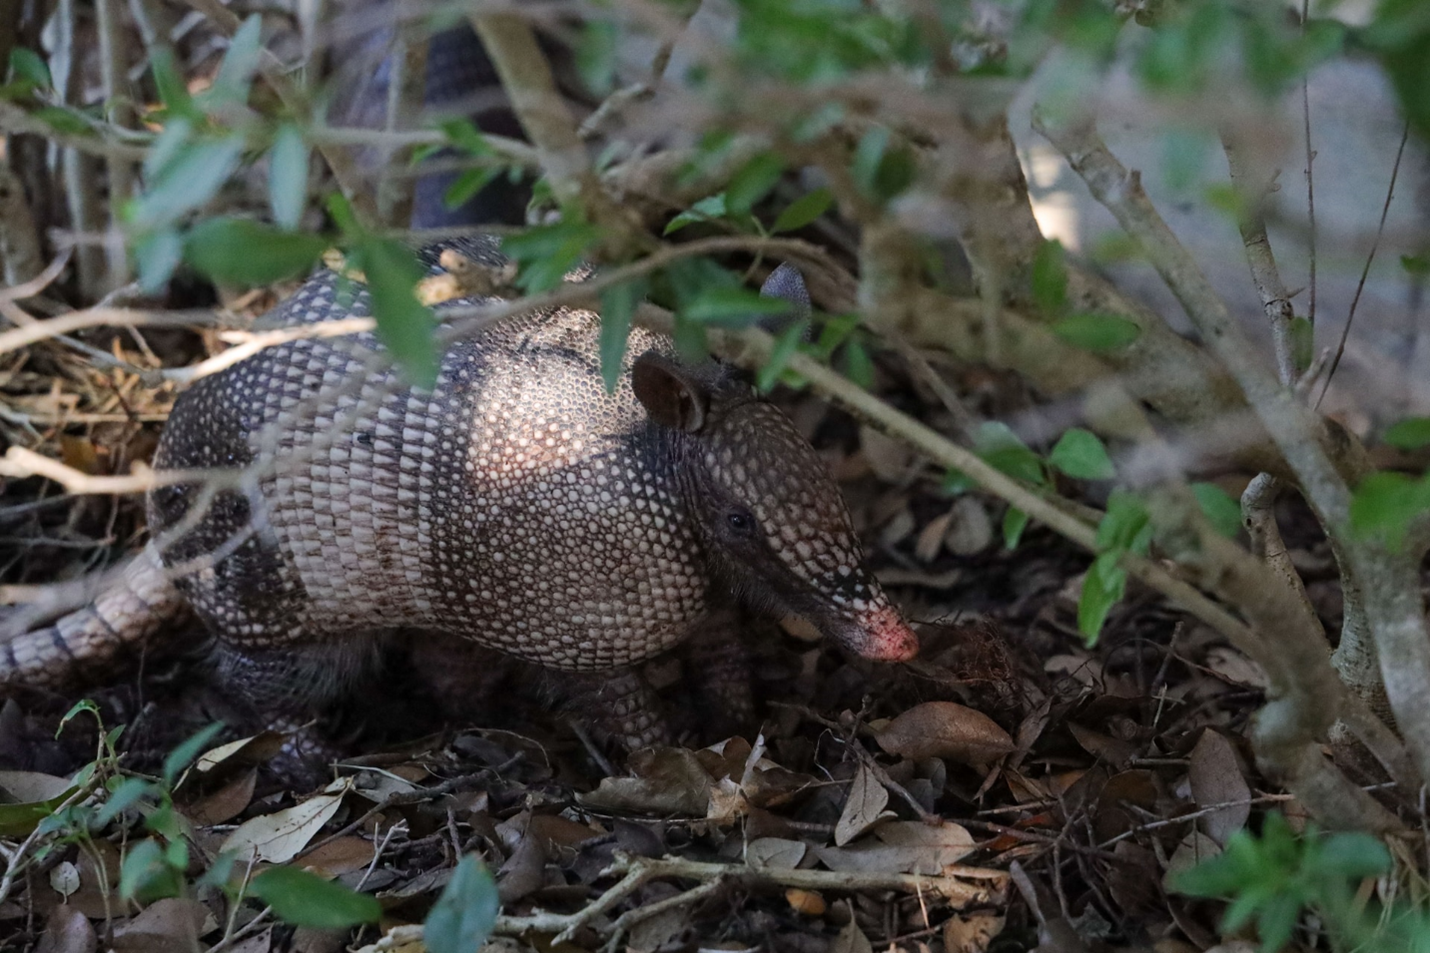 "A sun-dappled nine-banded armadillo foraging in undergrowth"